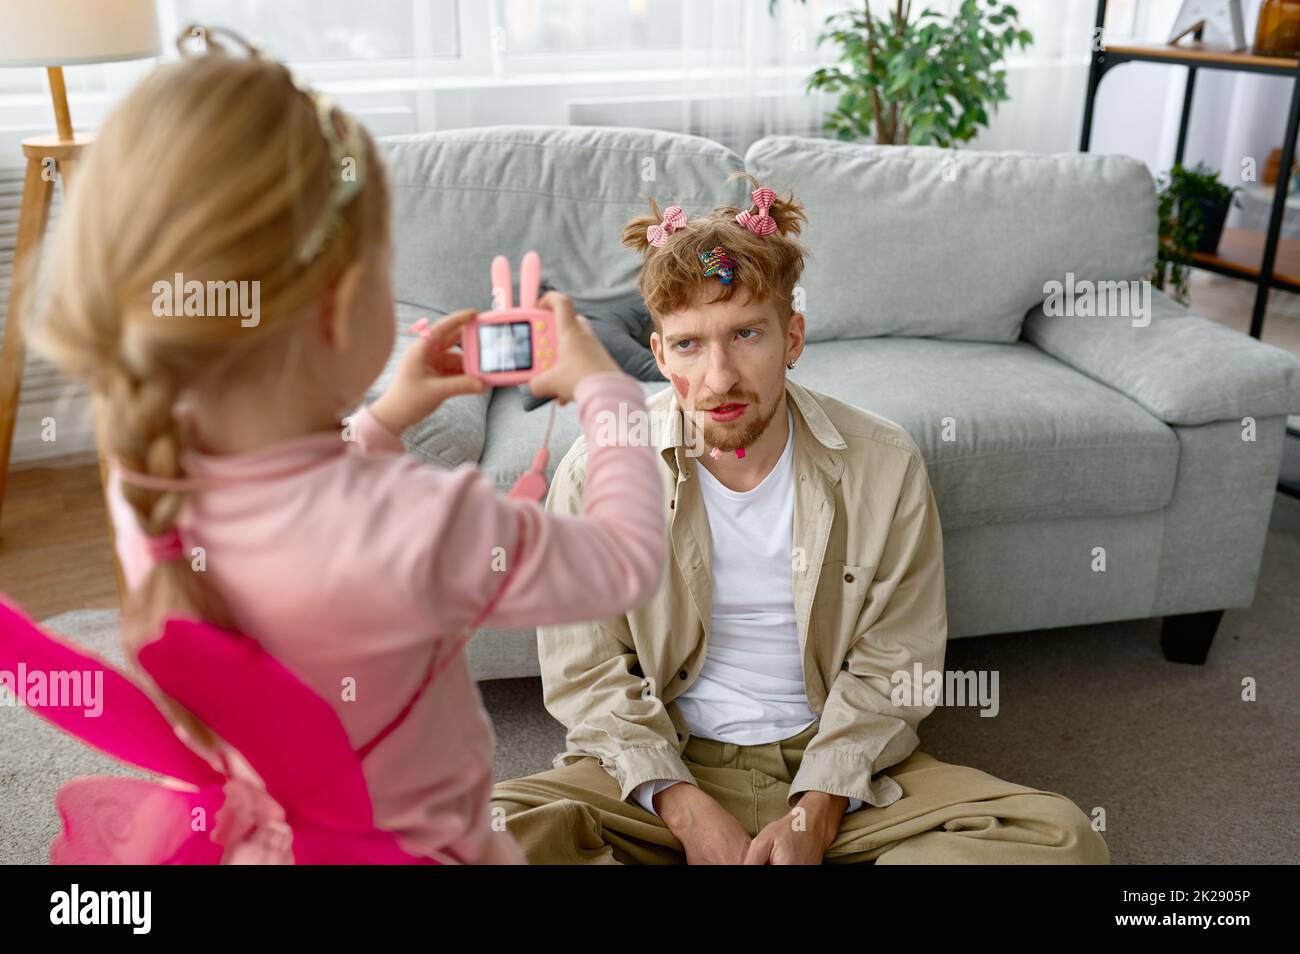 Daughter making shot of father with funny makeup Stock Photo